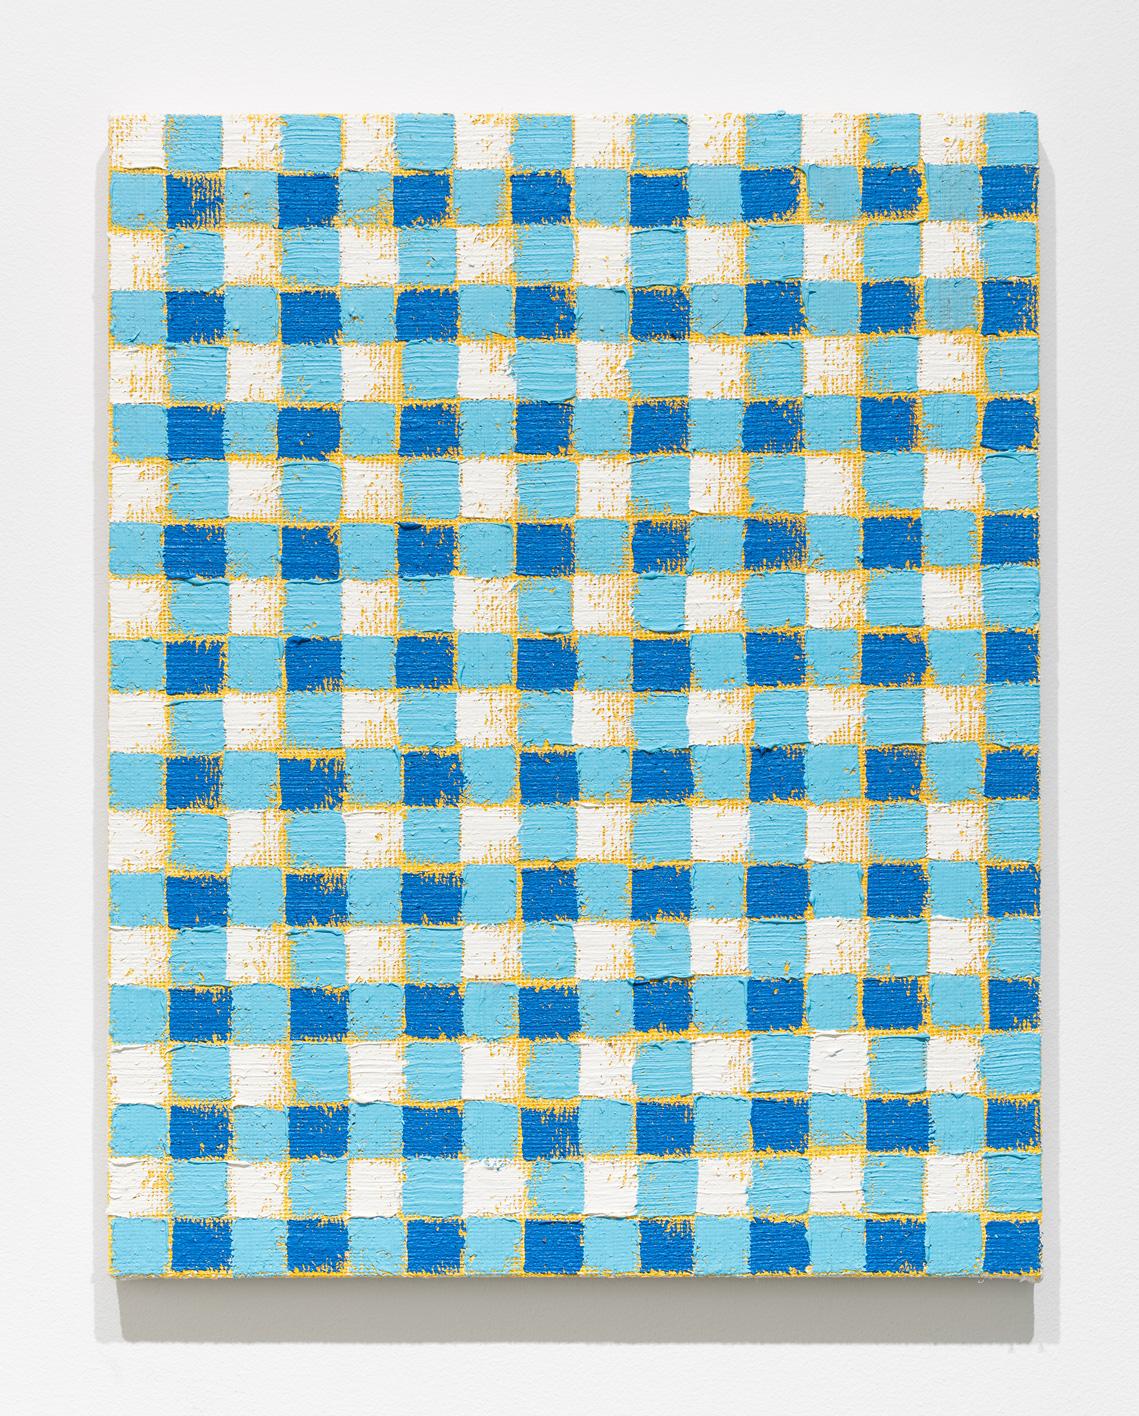 Michelle Grabner, Untitled, 2017, oil paint on burlap on cradled panel, 20 x 16 x 1 inches.

Michelle Grabner (b. 1962 in Oshkosh, Wisconsin) works in variety of mediums including drawing, painting, video and sculpture. Grabner’s multi-faceted